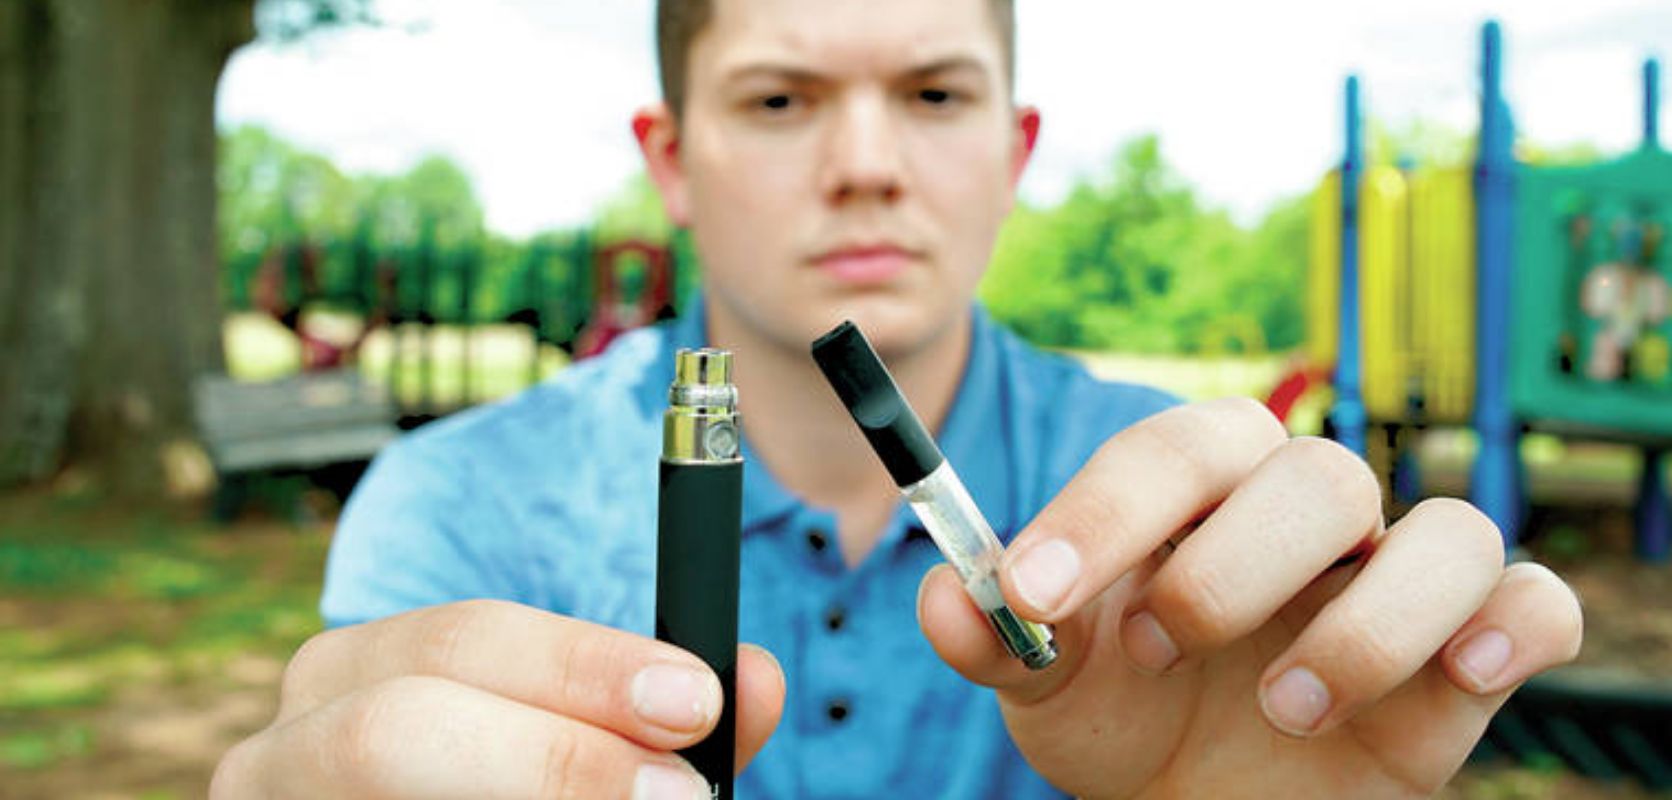 In addition to providing the fastest effects, inhalation techniques, including vaping, provide greater bioavailability than other consumption methods. 